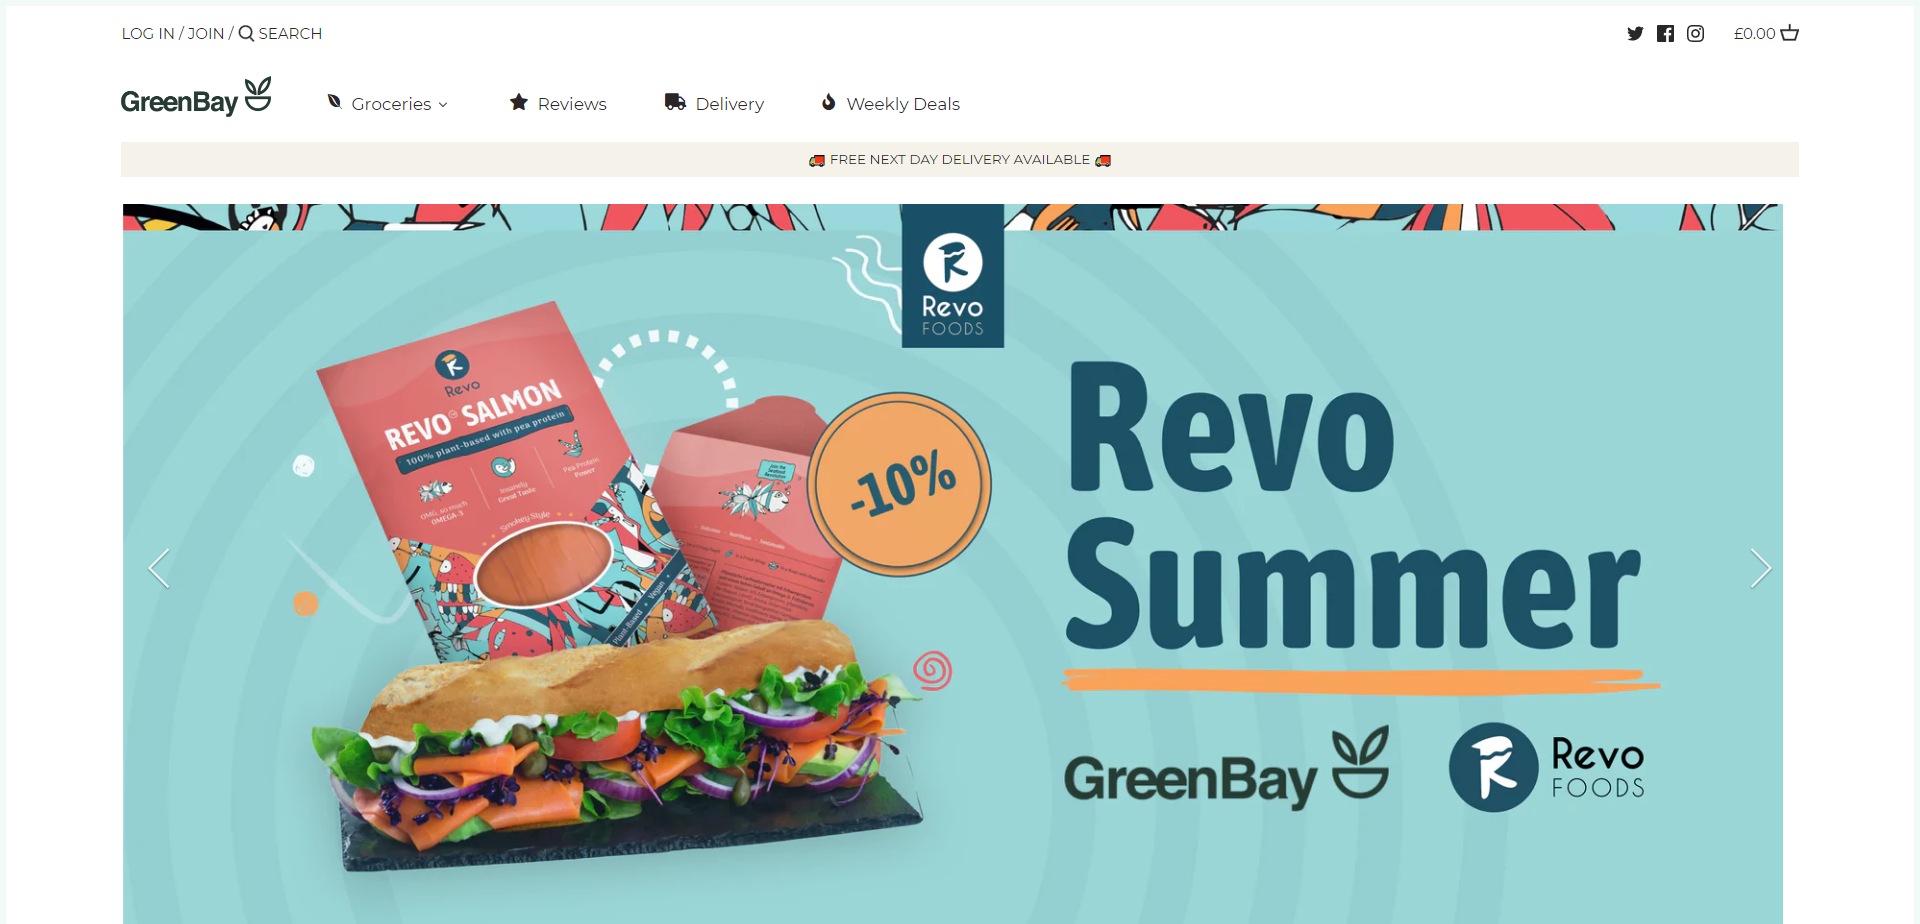 Landing Page for Green Bay Supermarket